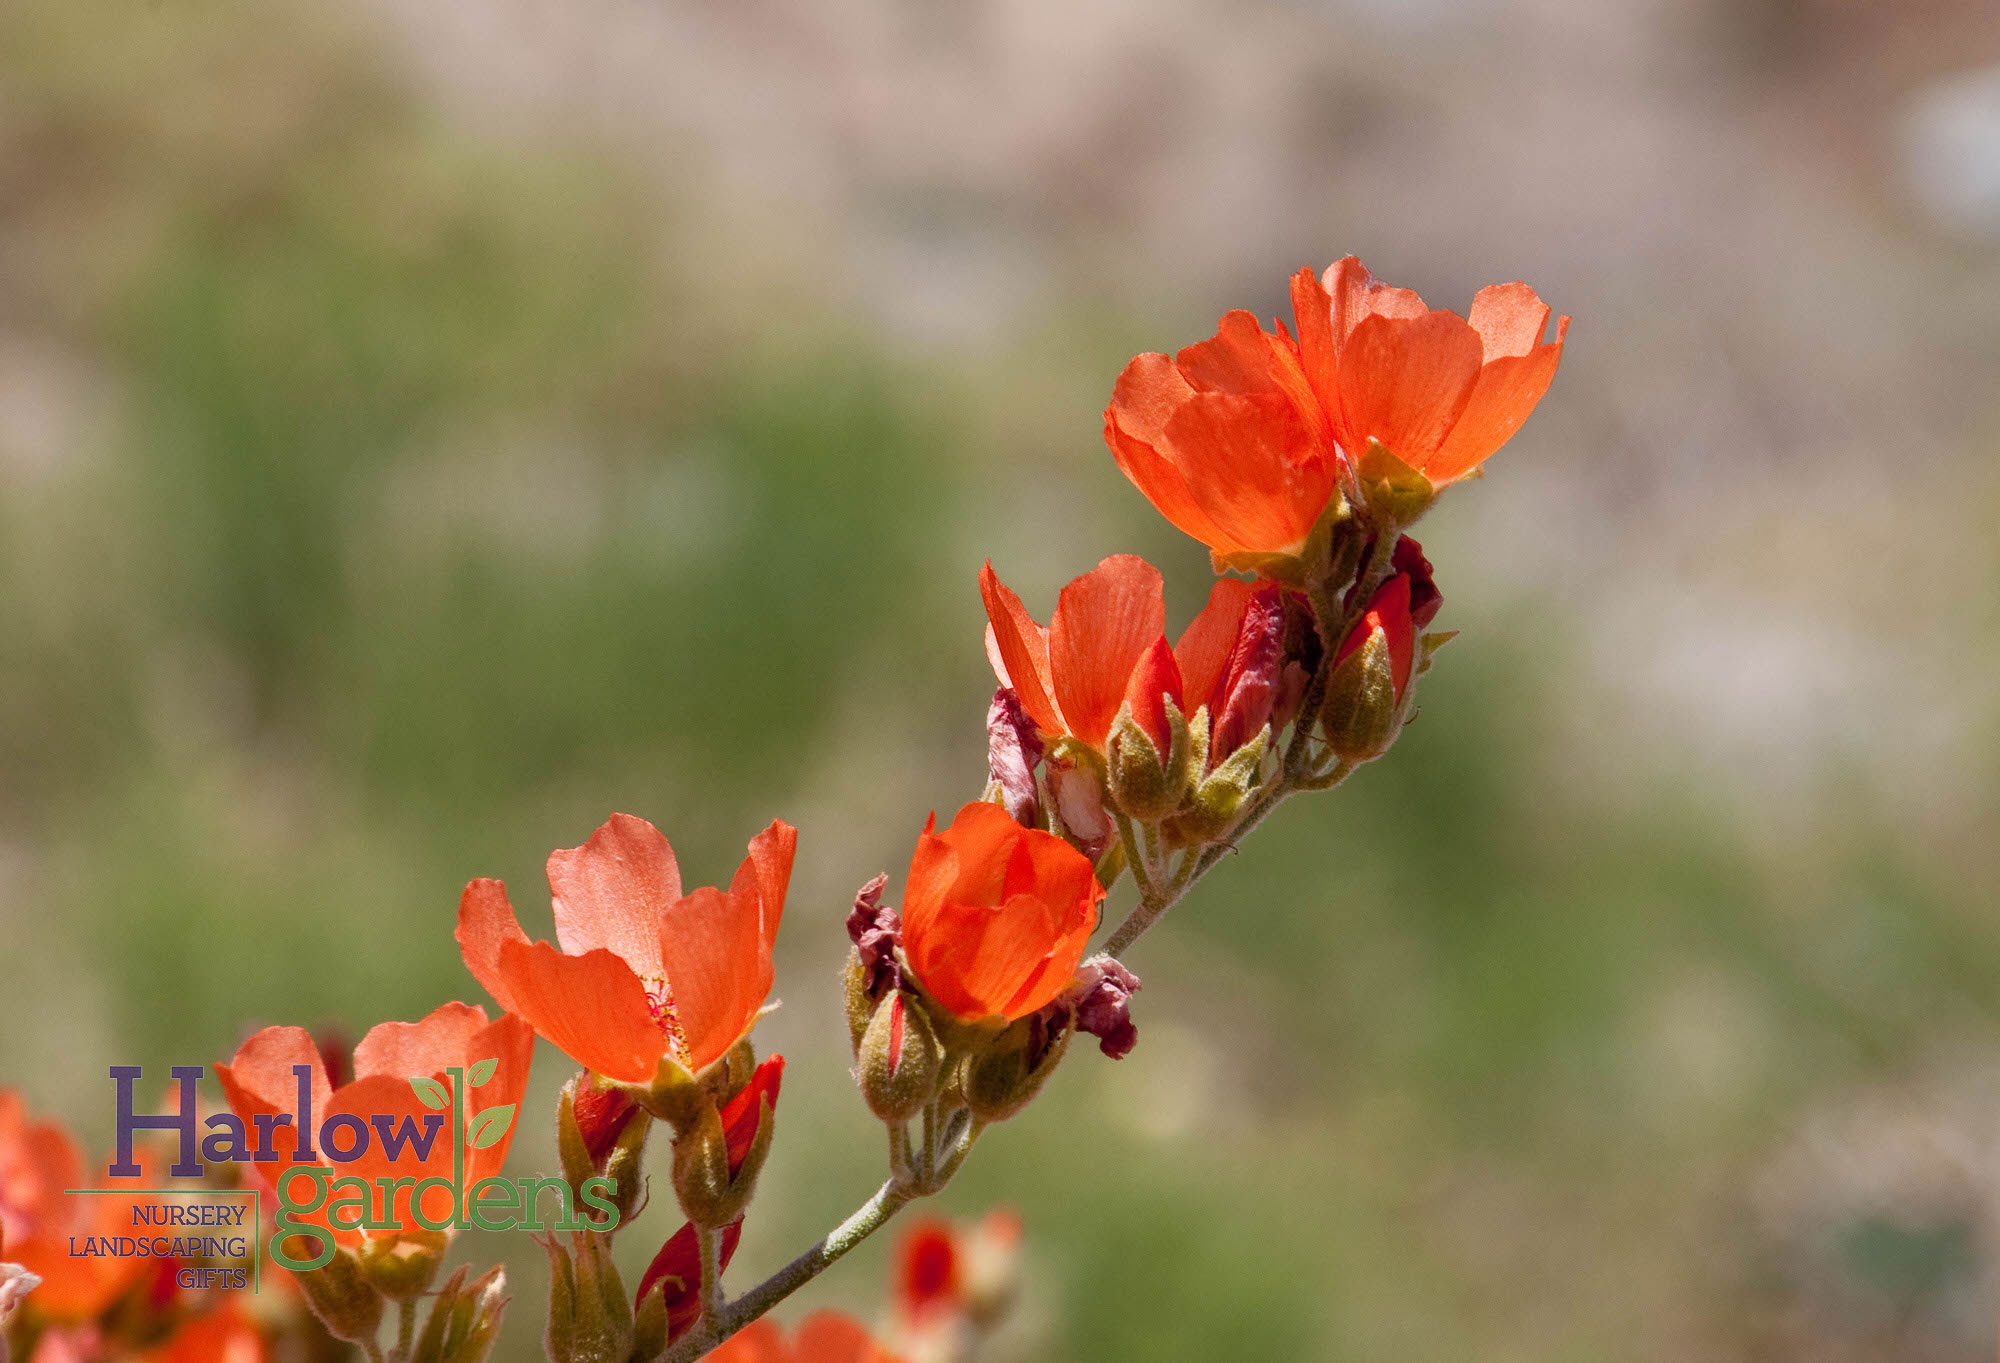 Globe Mallow for sale at Harlow Gardens Tucson.